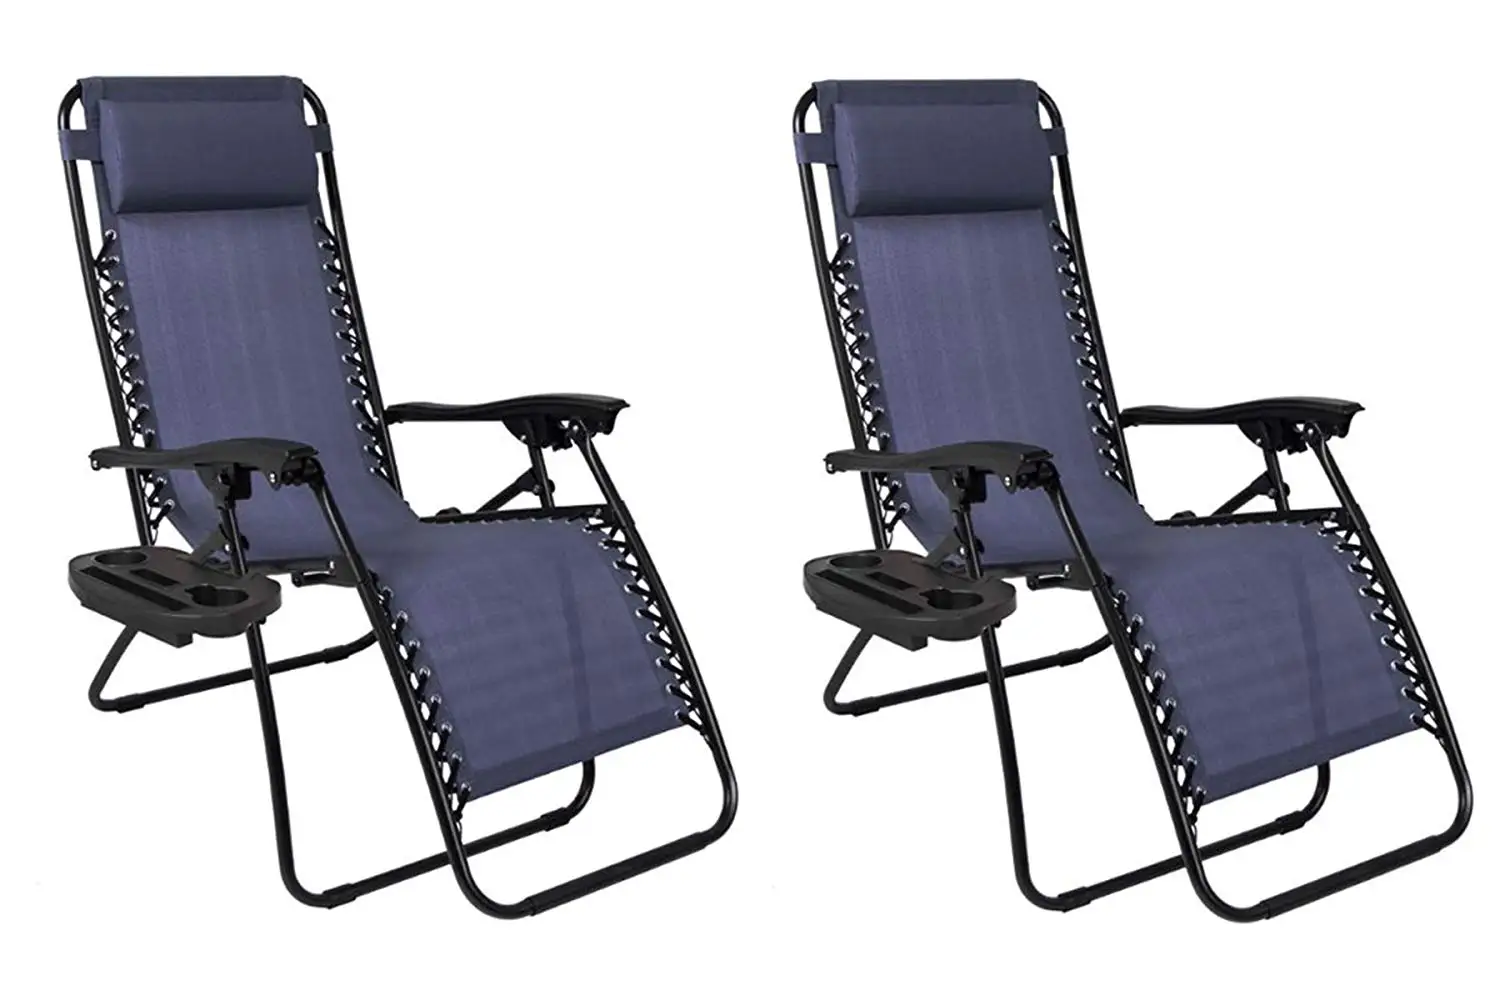 Cheap O Gravity Chairs, find O Gravity Chairs deals on line at Alibaba.com